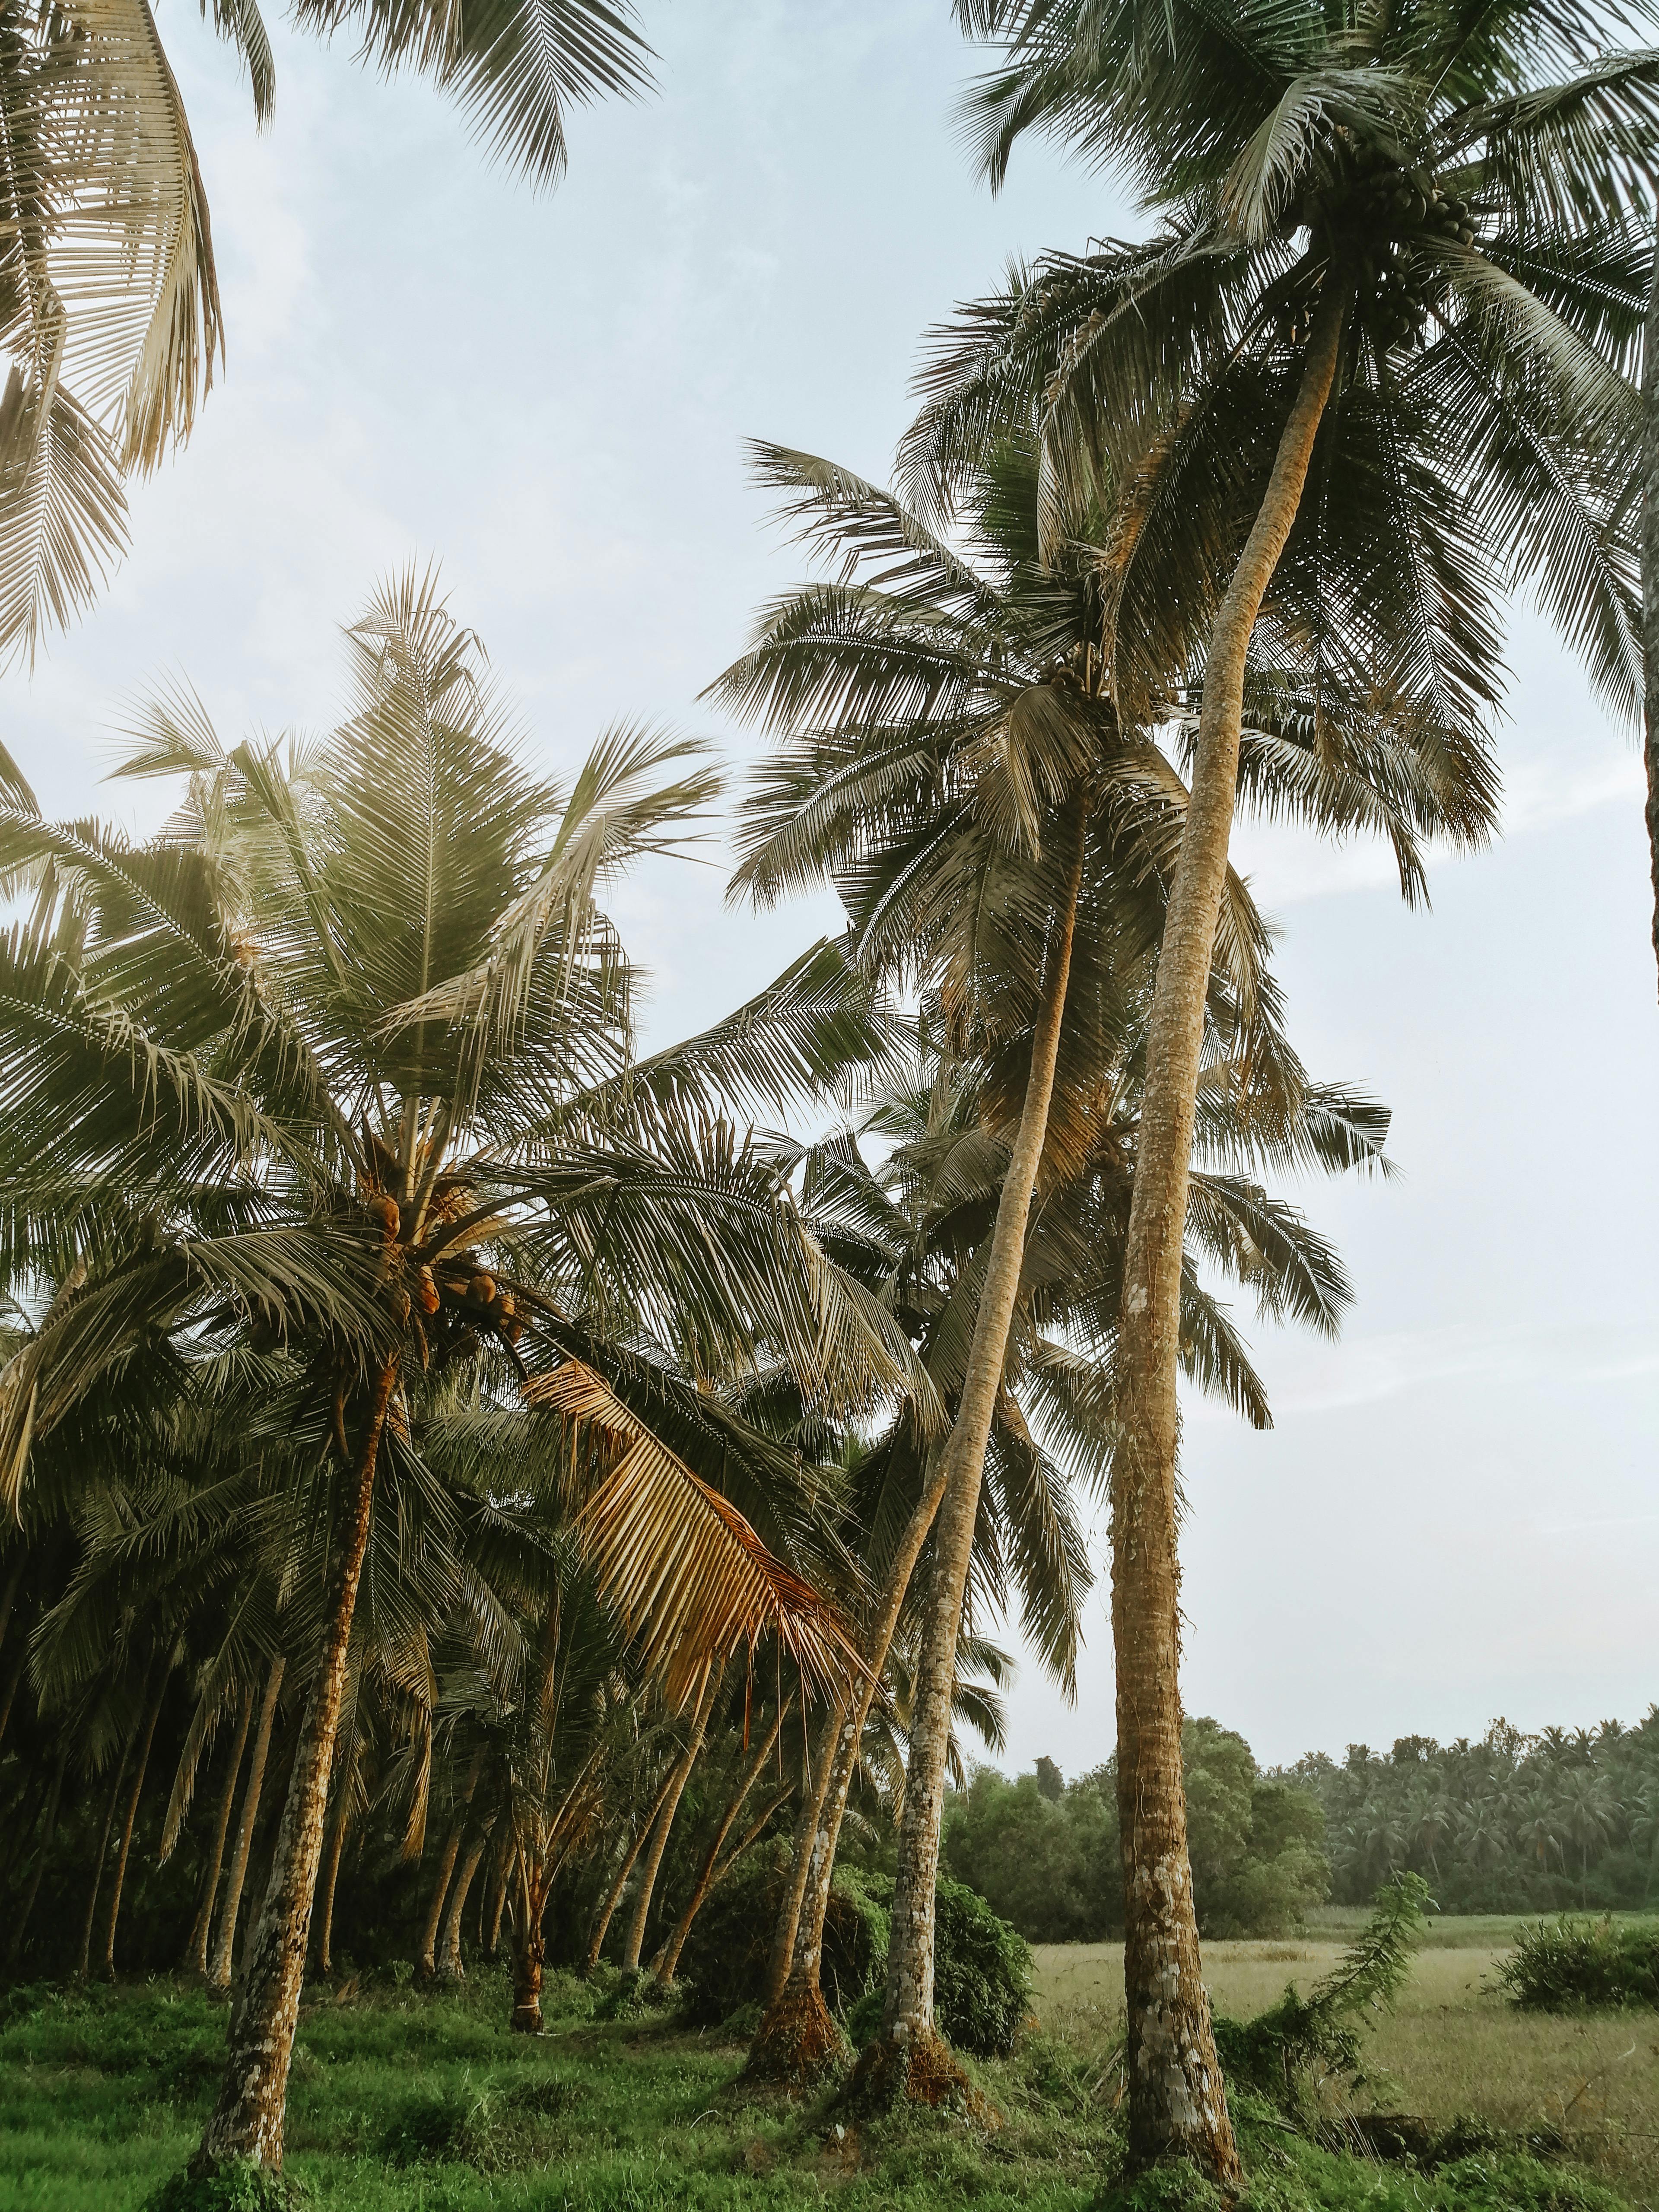 500 Kerala Pictures Scenic Travel Photos  Download Free Images on  Unsplash